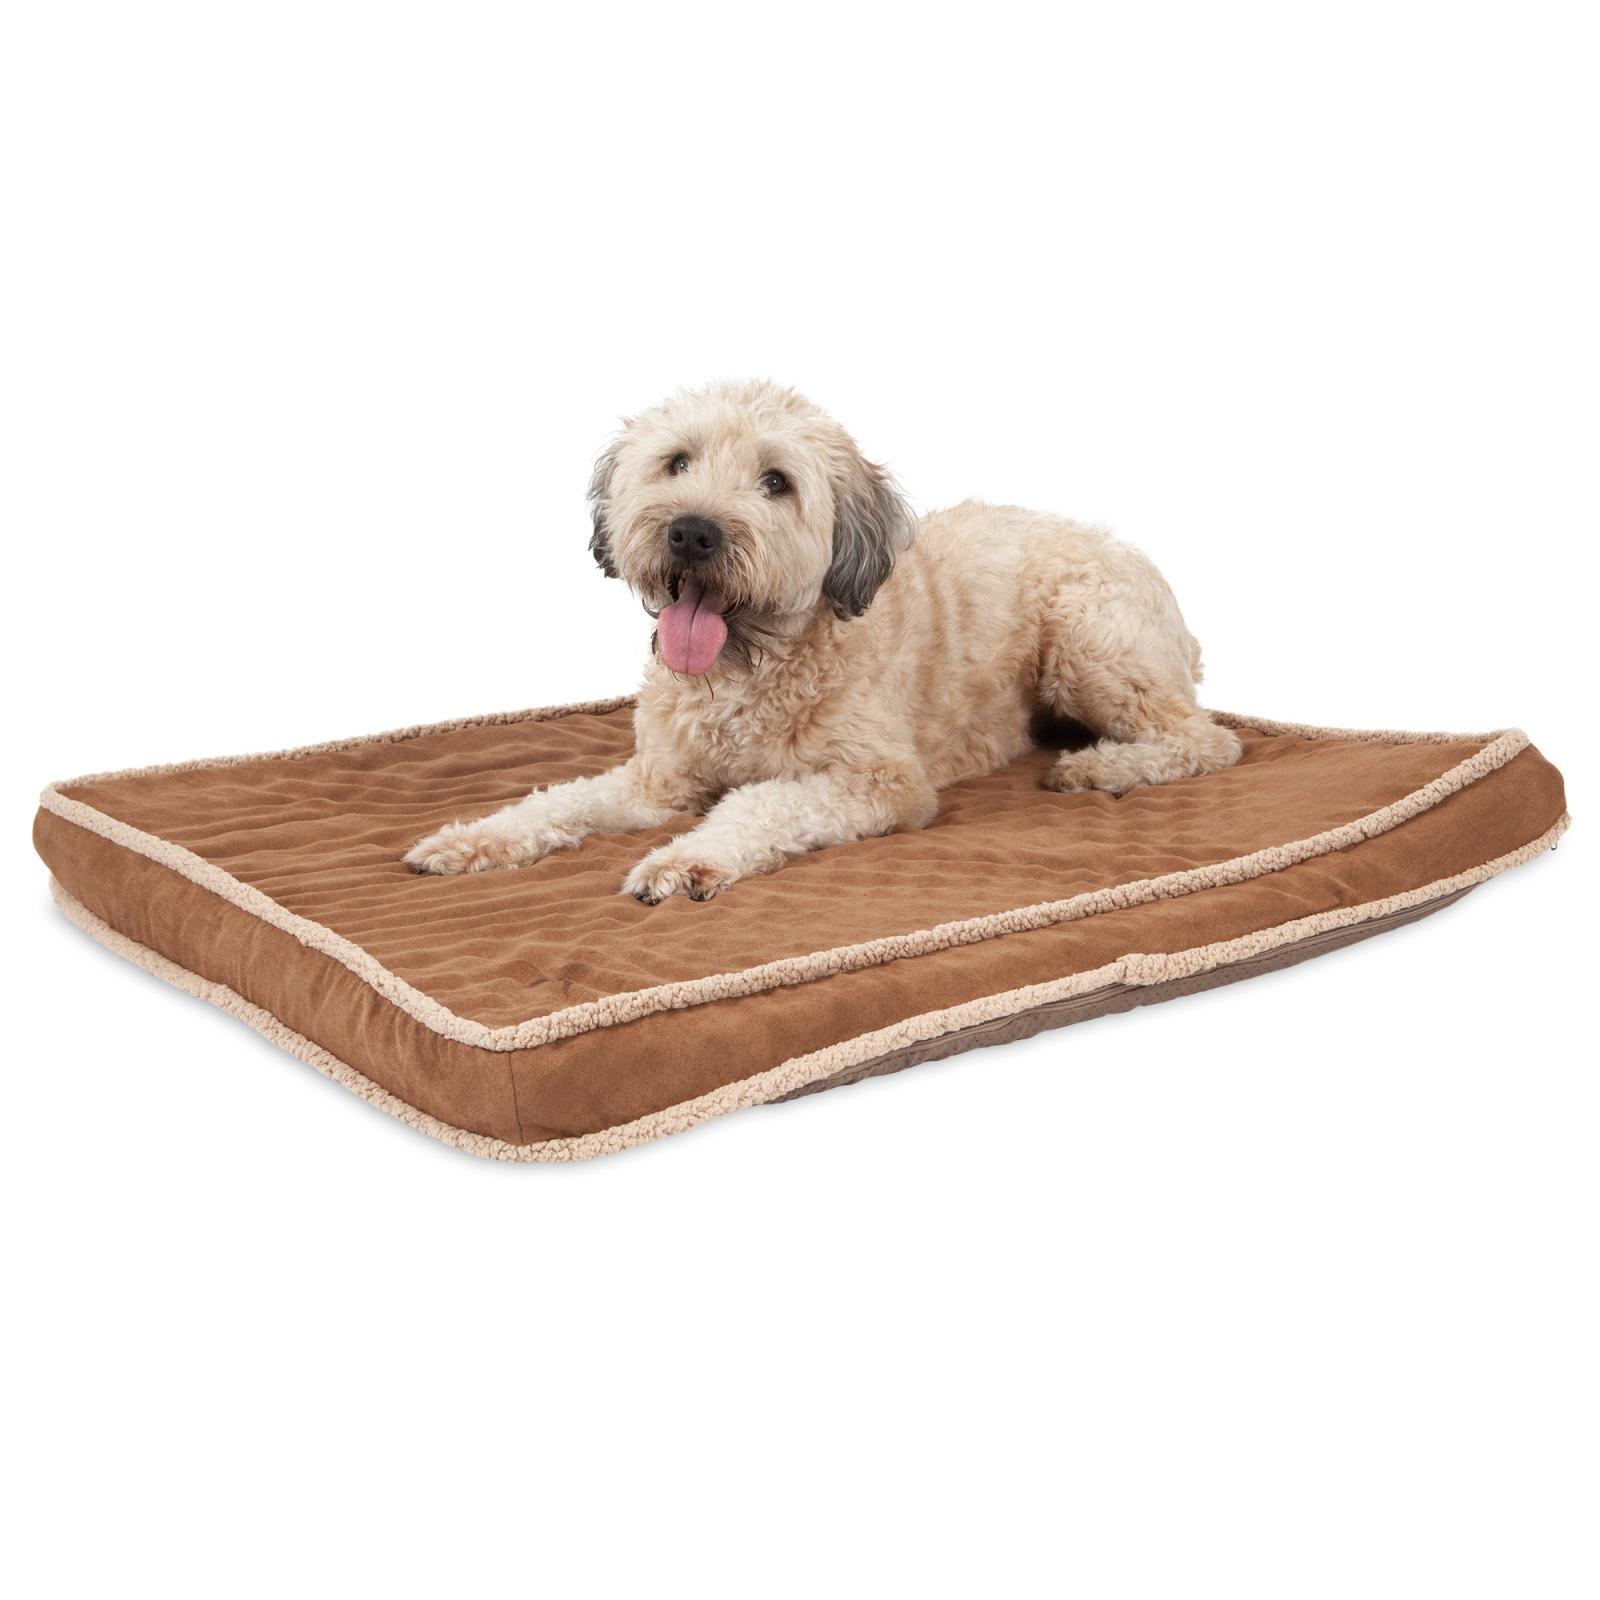 Aspen Pet Orthopedic Plush Quilted Bed